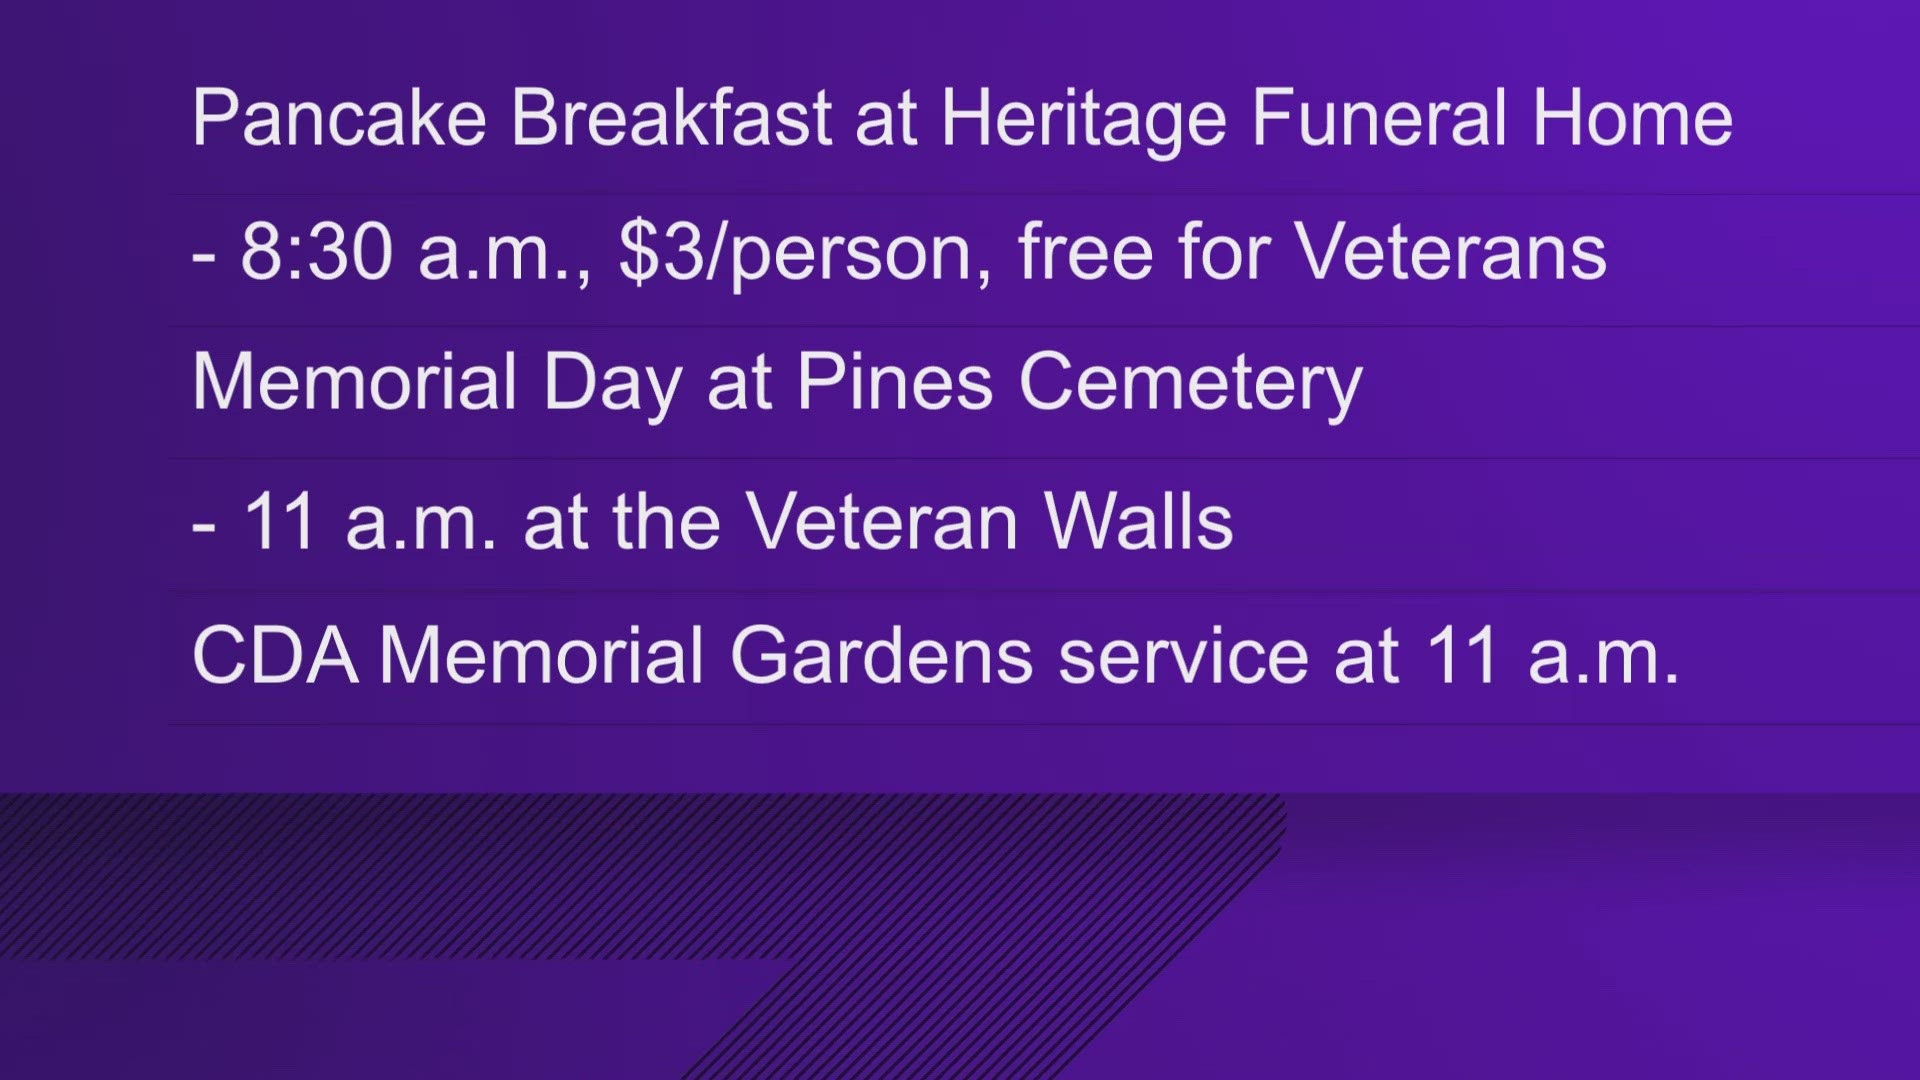 Several events are happening over the extended weekend in honor of Memorial Day Weekend around greater Spokane and North Idaho.